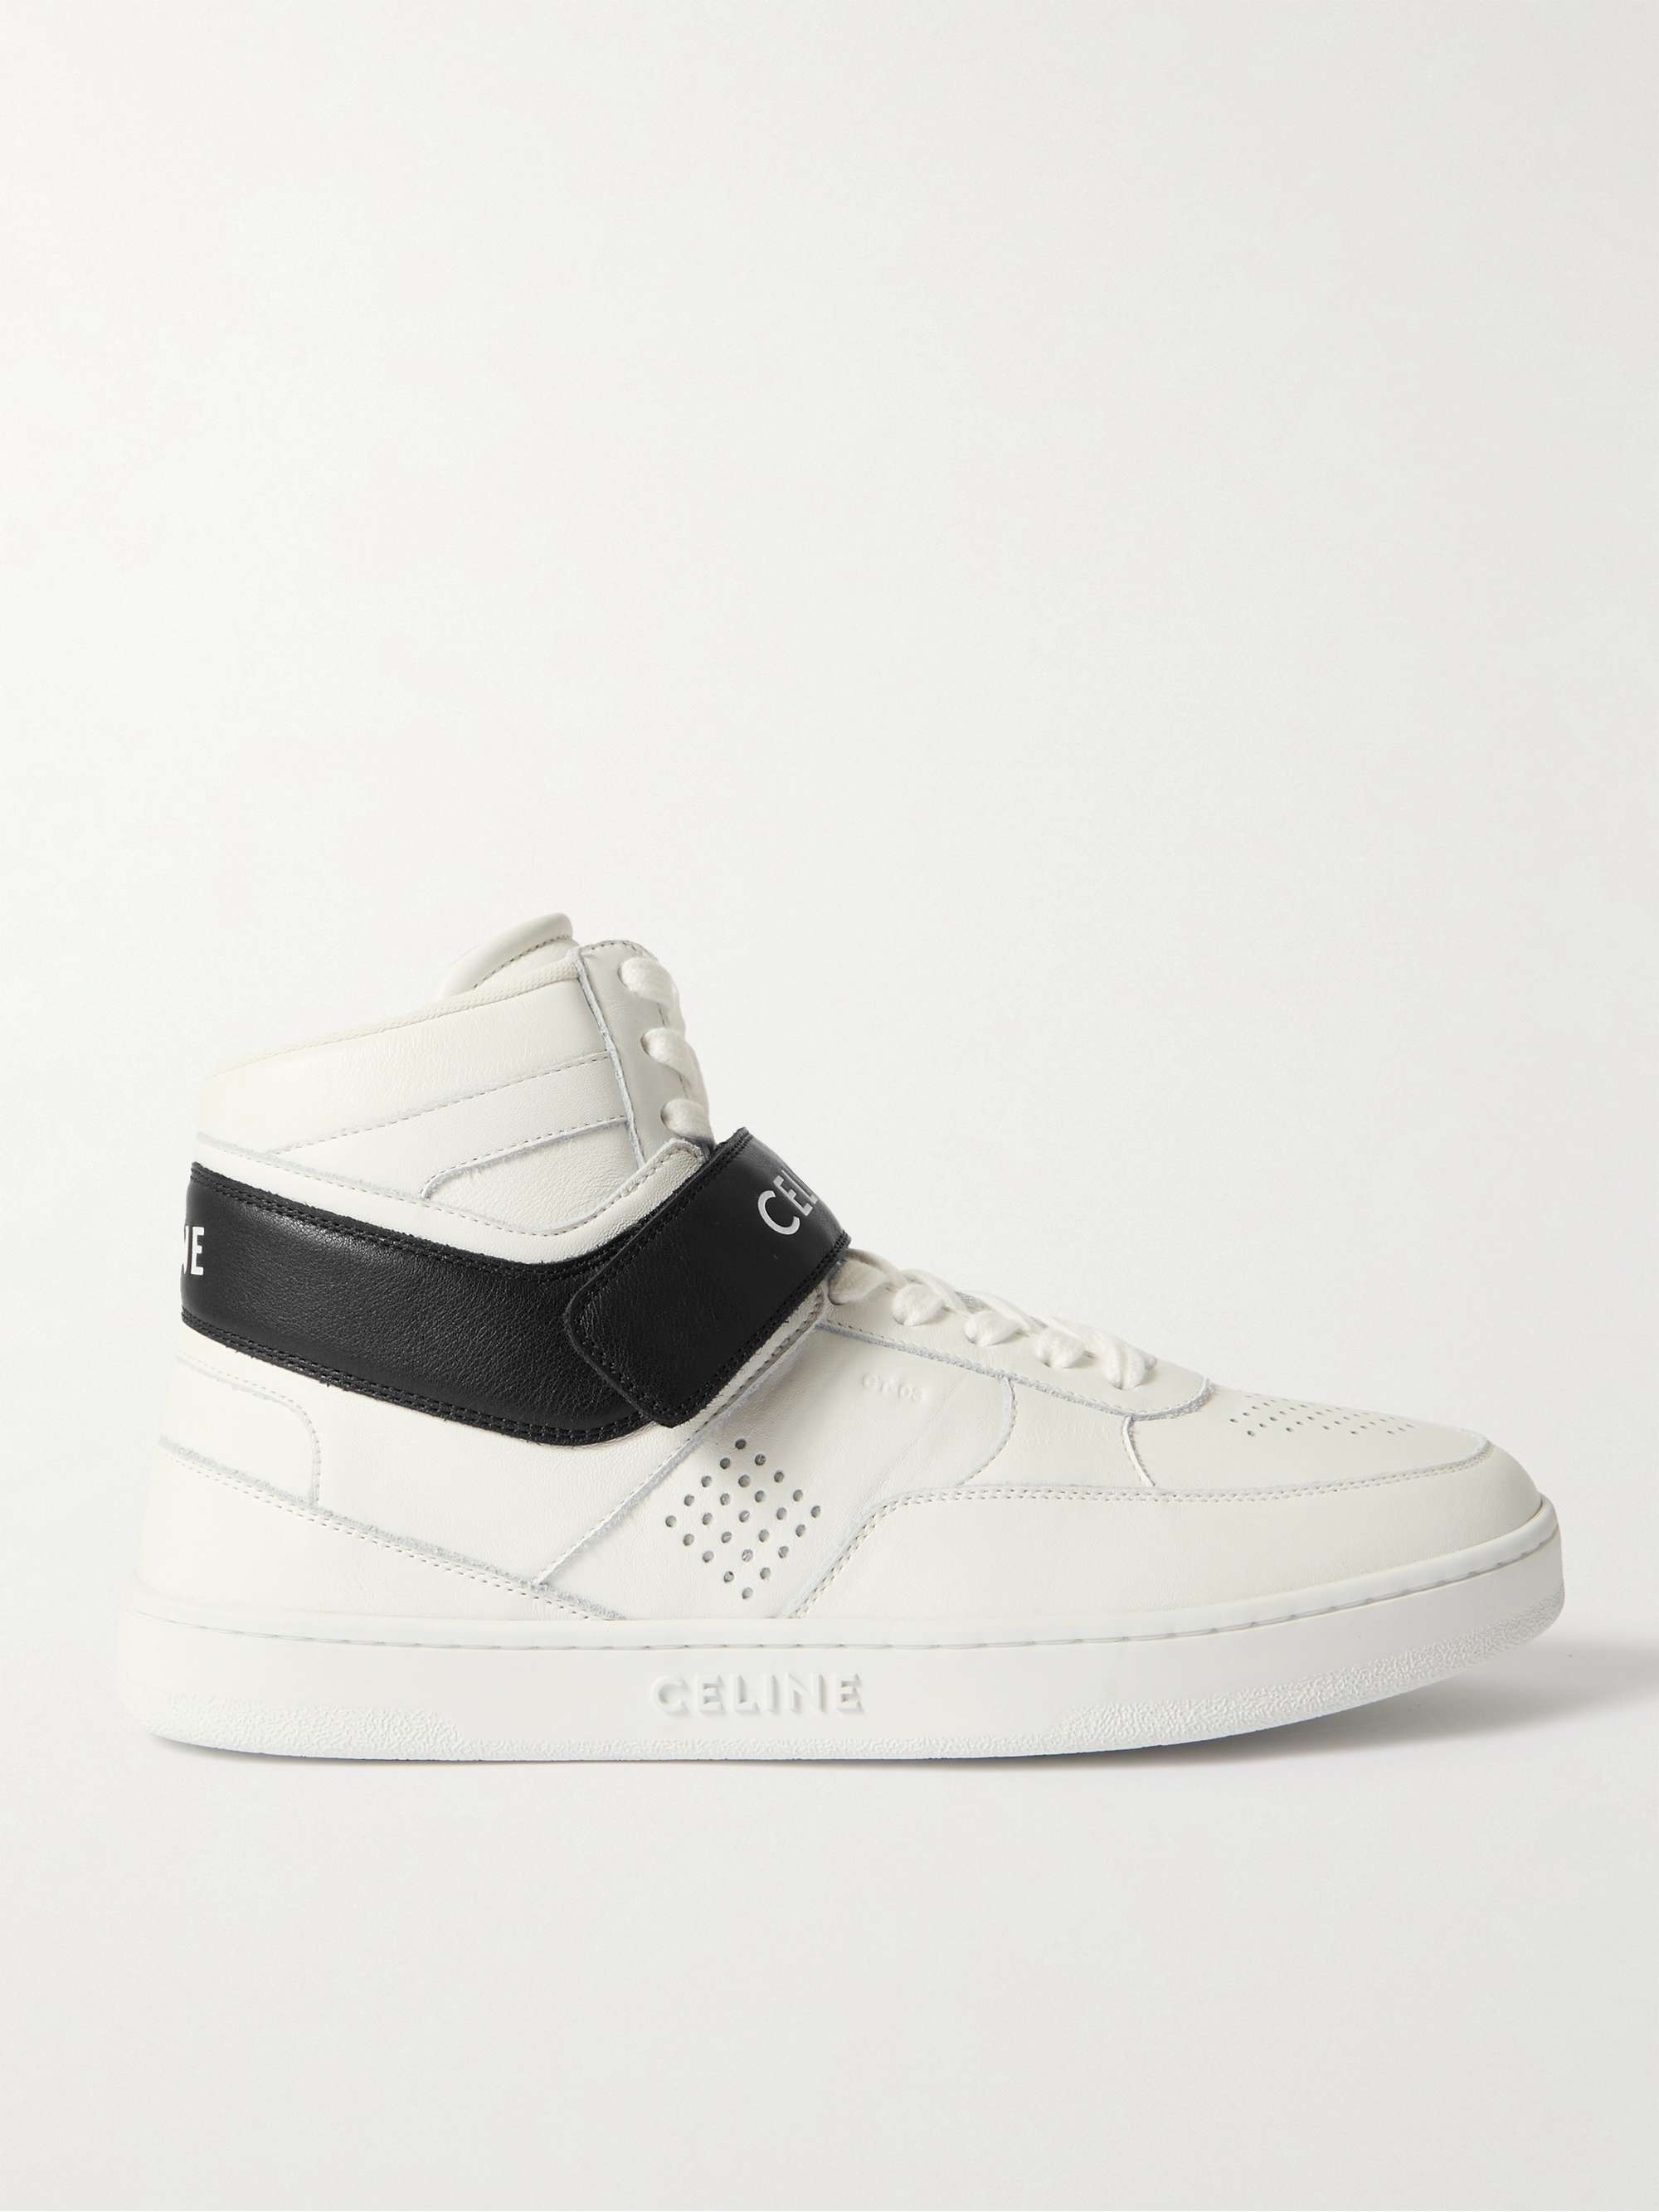 CELINE HOMME CT-03 Leather High-Top Sneakers | MR PORTER